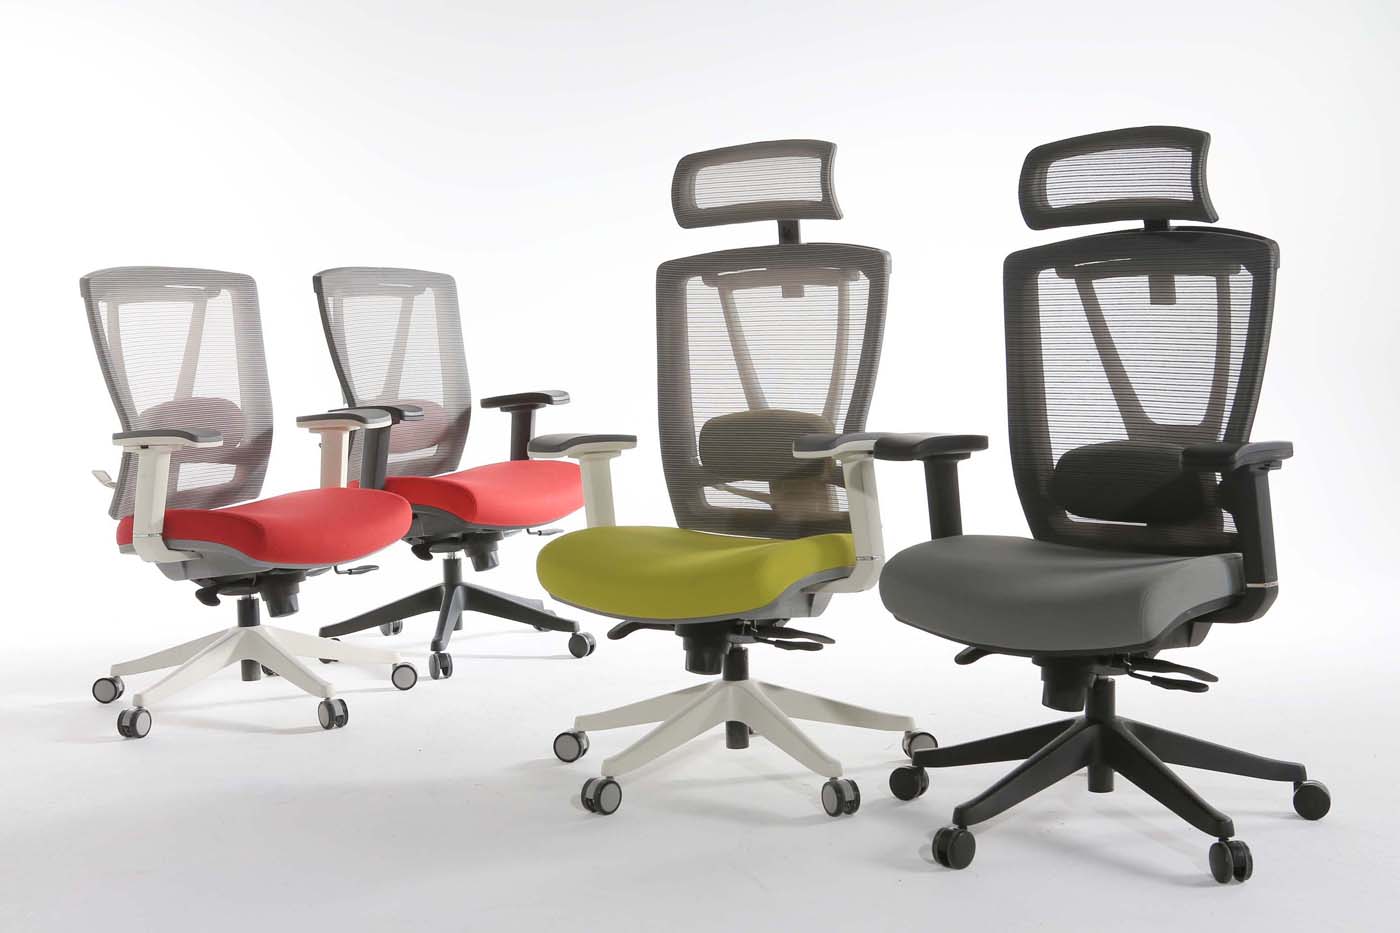 Ergonomic and comfortable office chairs in mesh and different colour fabrics